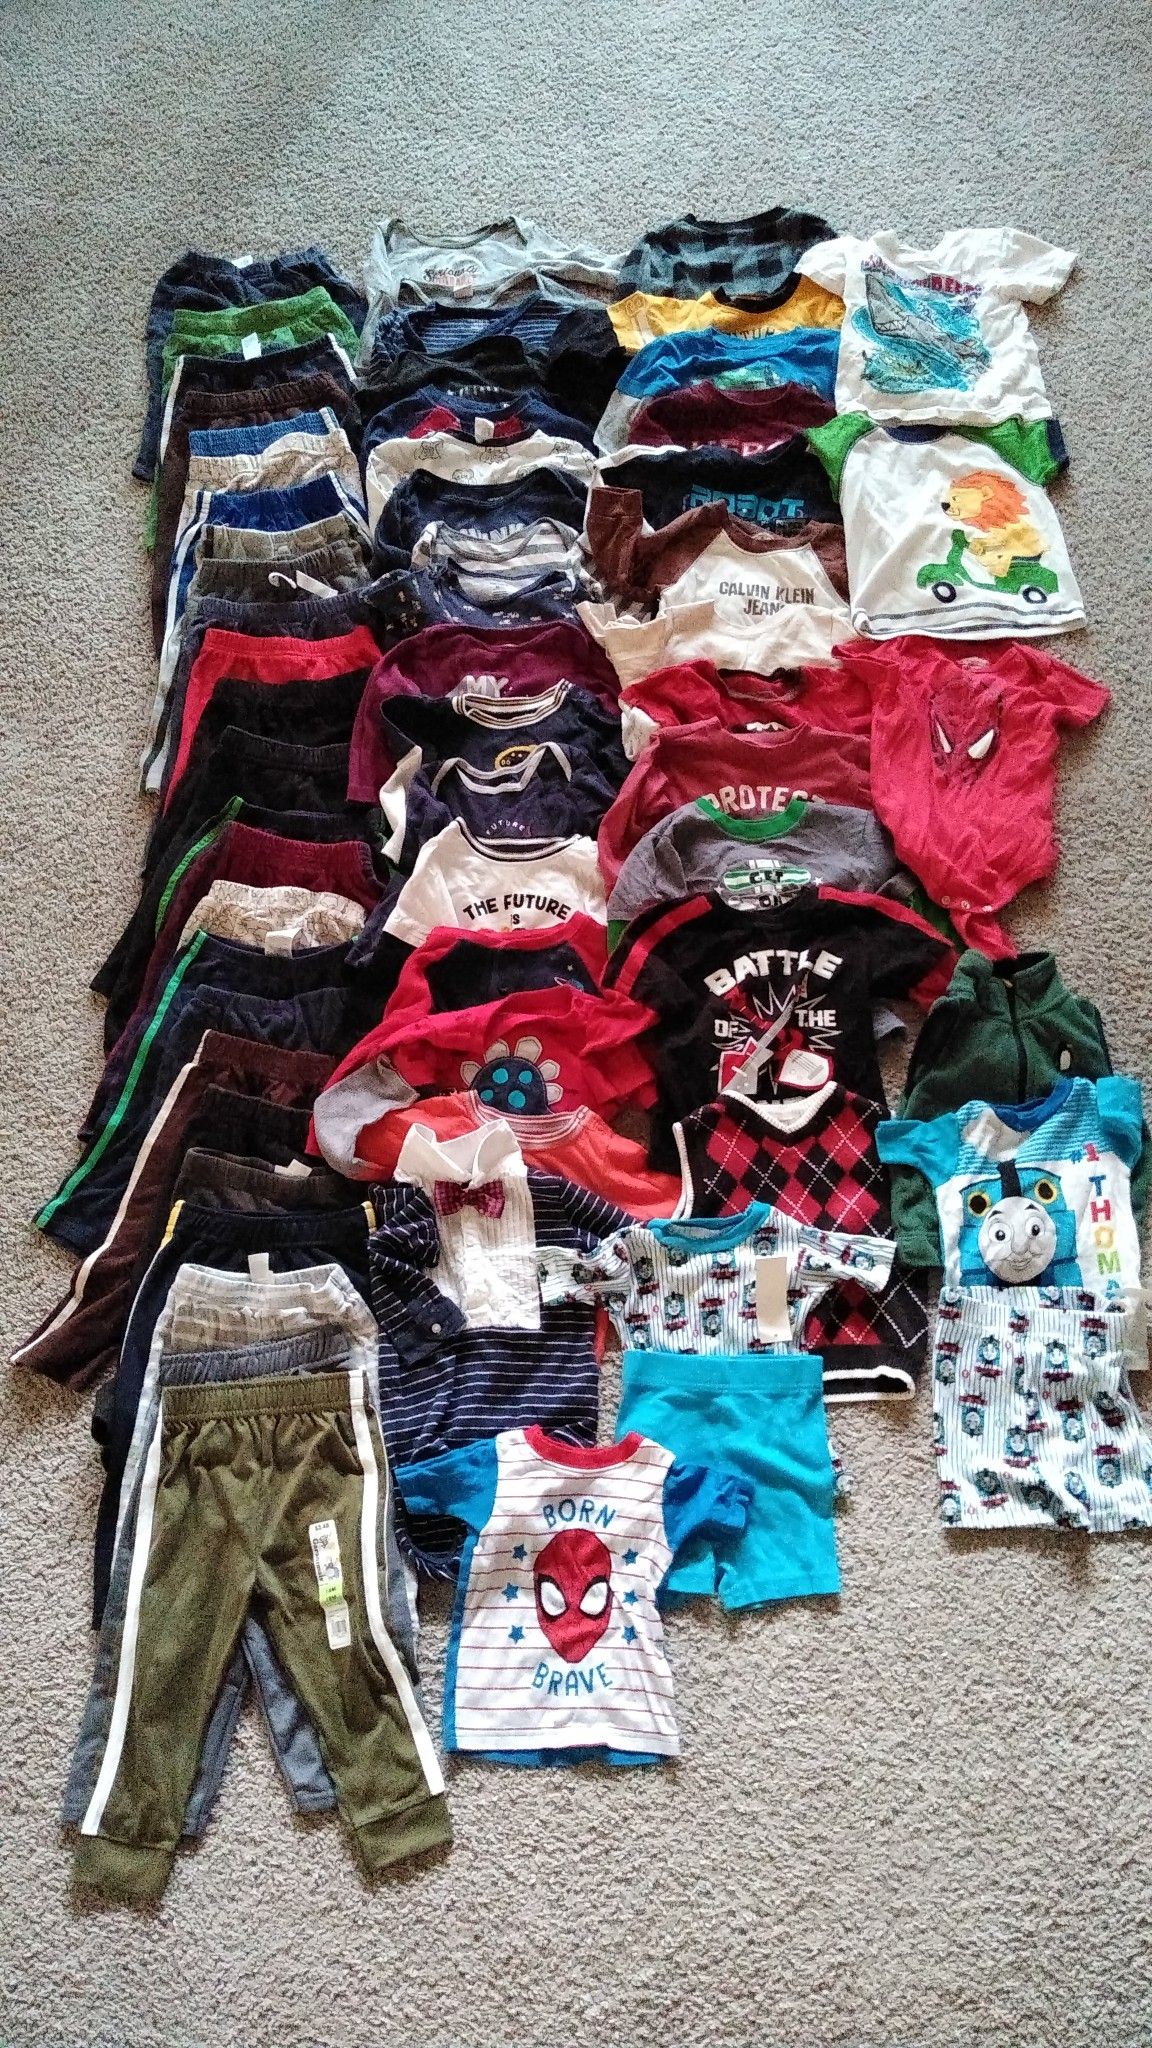 66 Beautiful Baby Boy's Clothes , size 18 Months ( excellent condition ) price for all